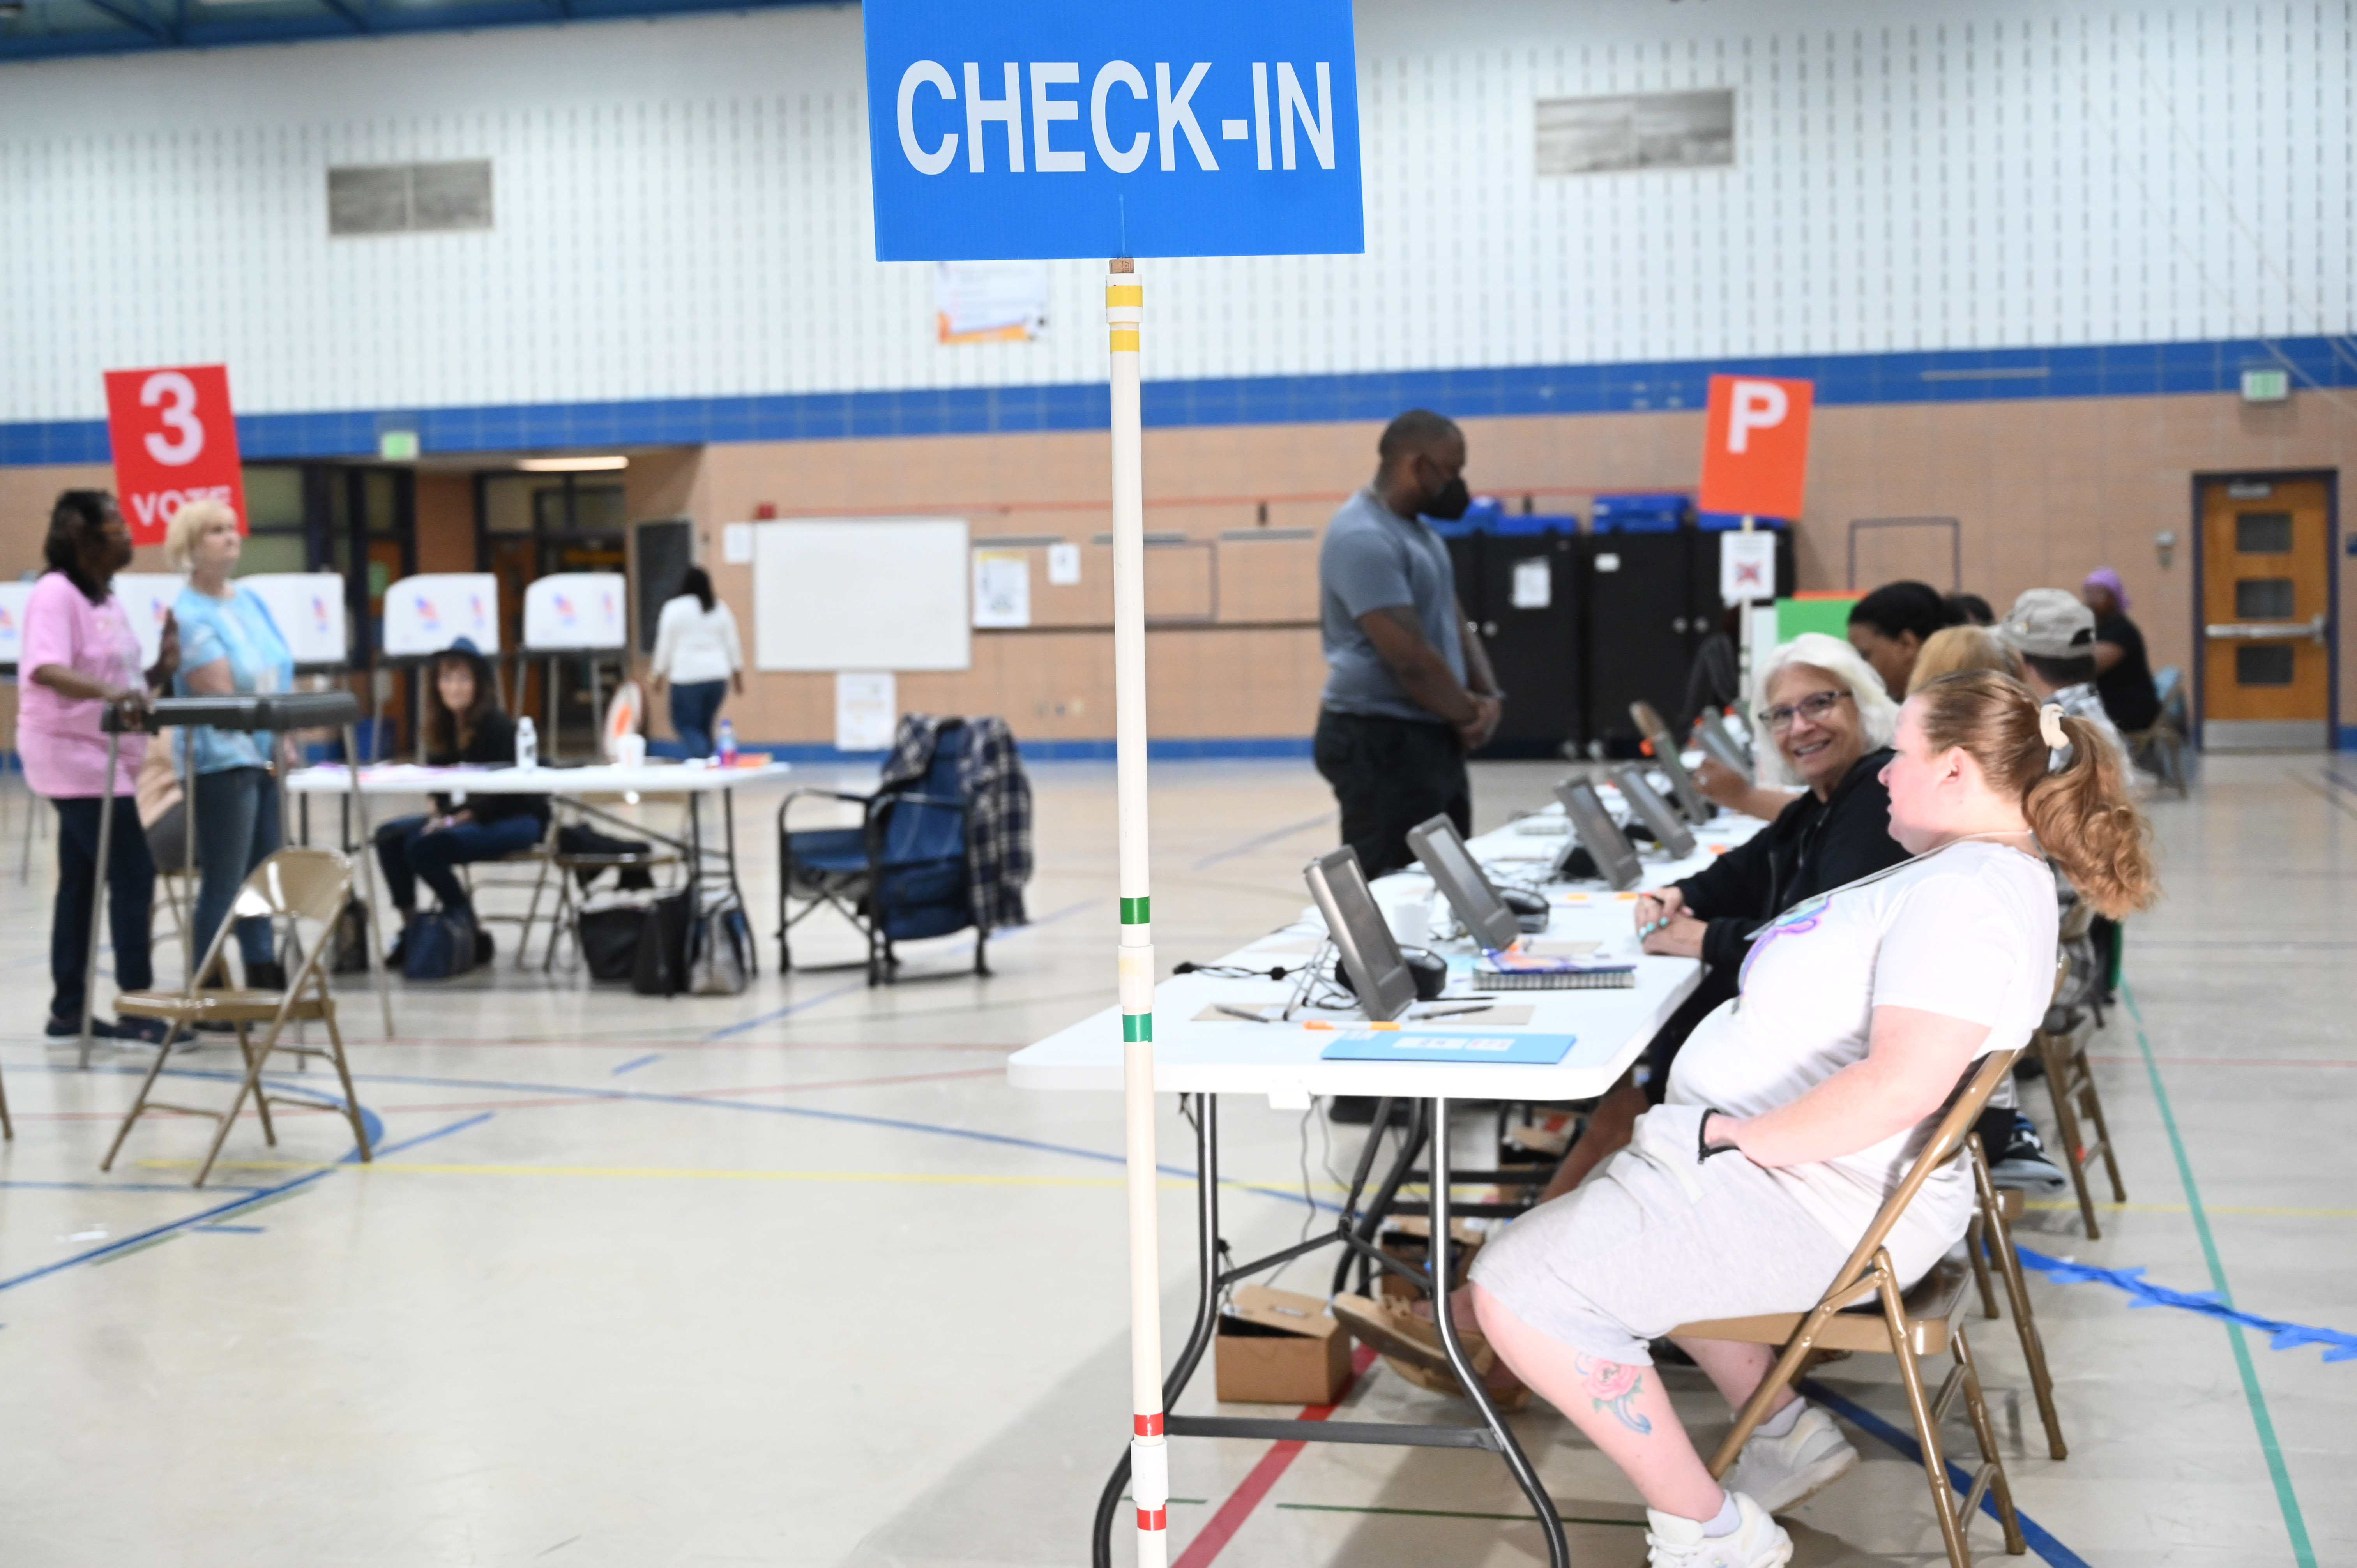 Election officials wait to check-in voters at the polling location at Church Creek Elementary for Maryland's primary election on Tuesday. (Brian Krista/staff photo)